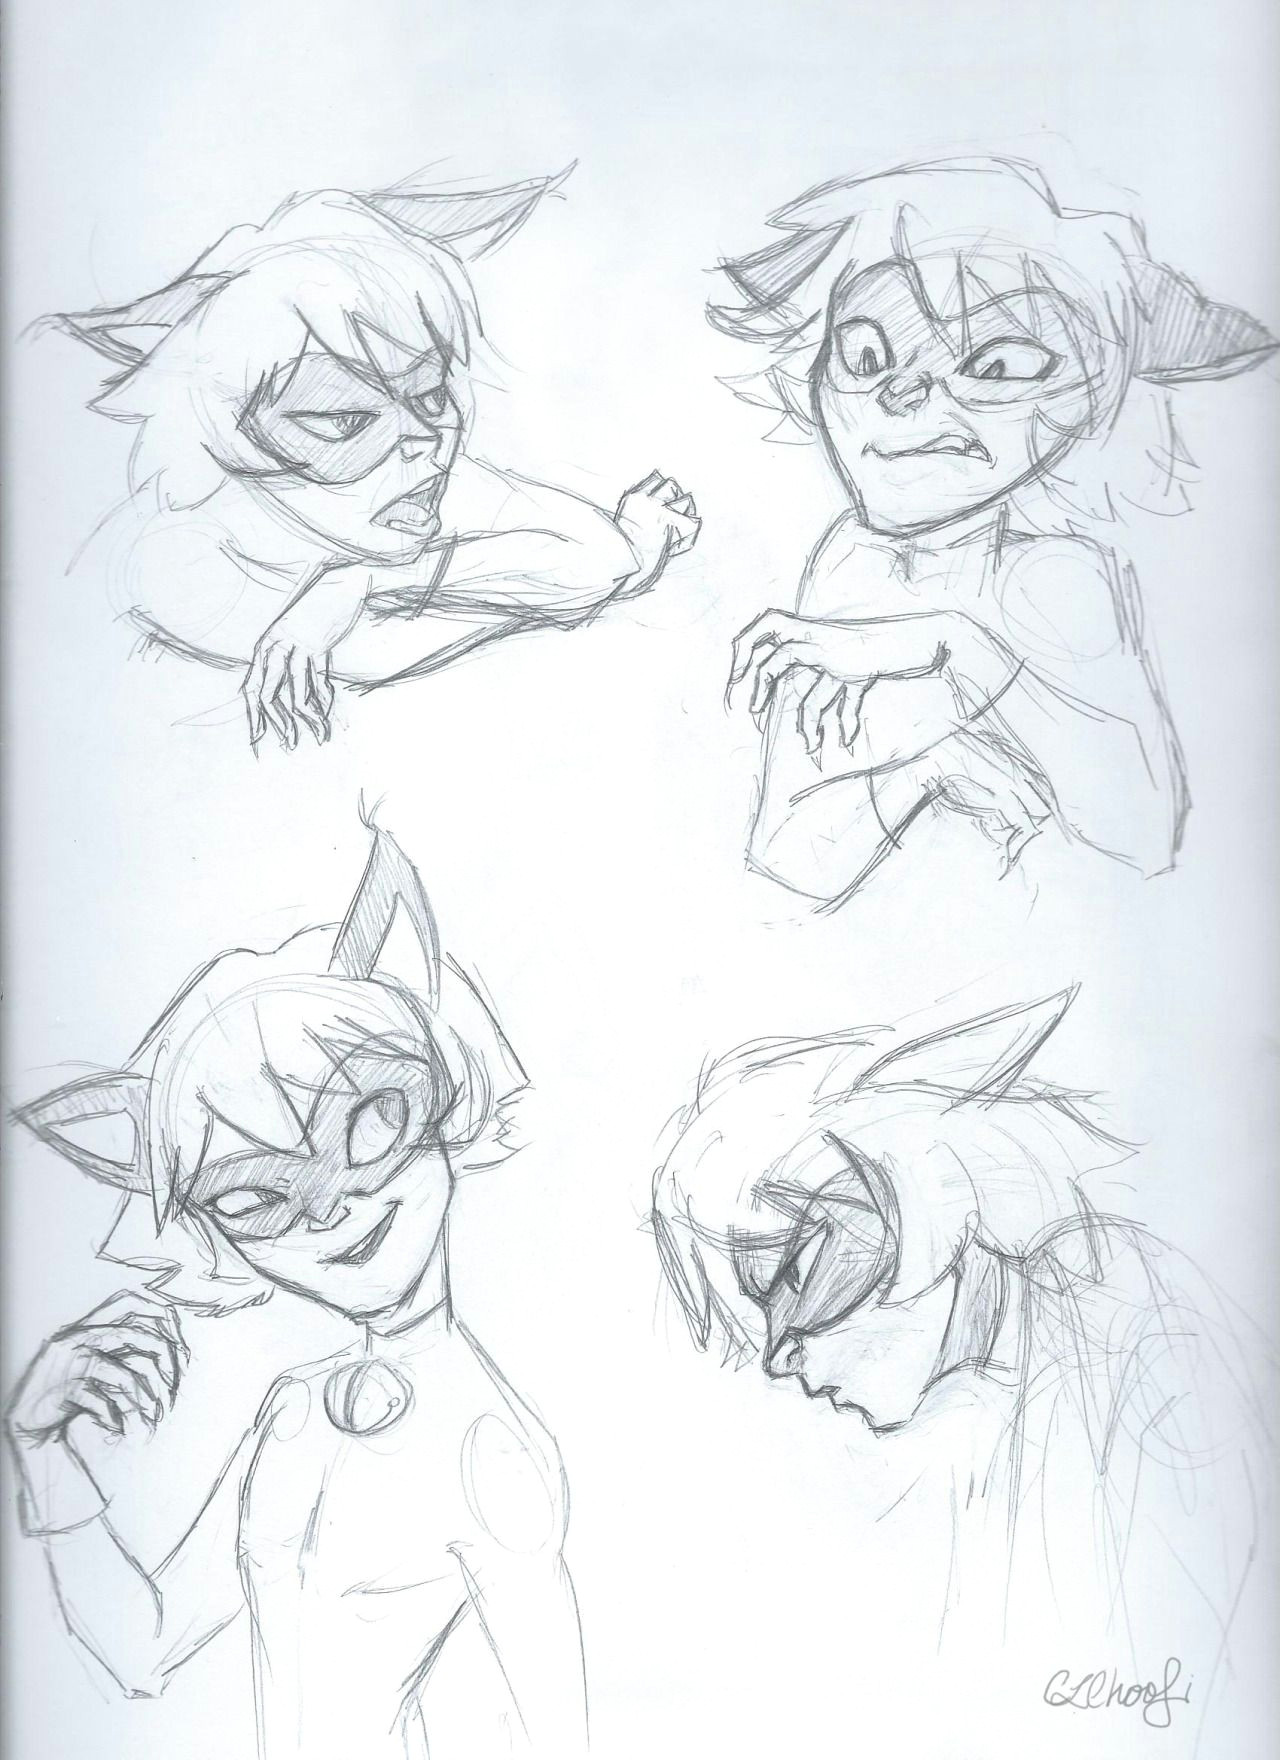 miraculous ladybug tumblr wow kudos to the artist everything about him in these sketches screams feline xd